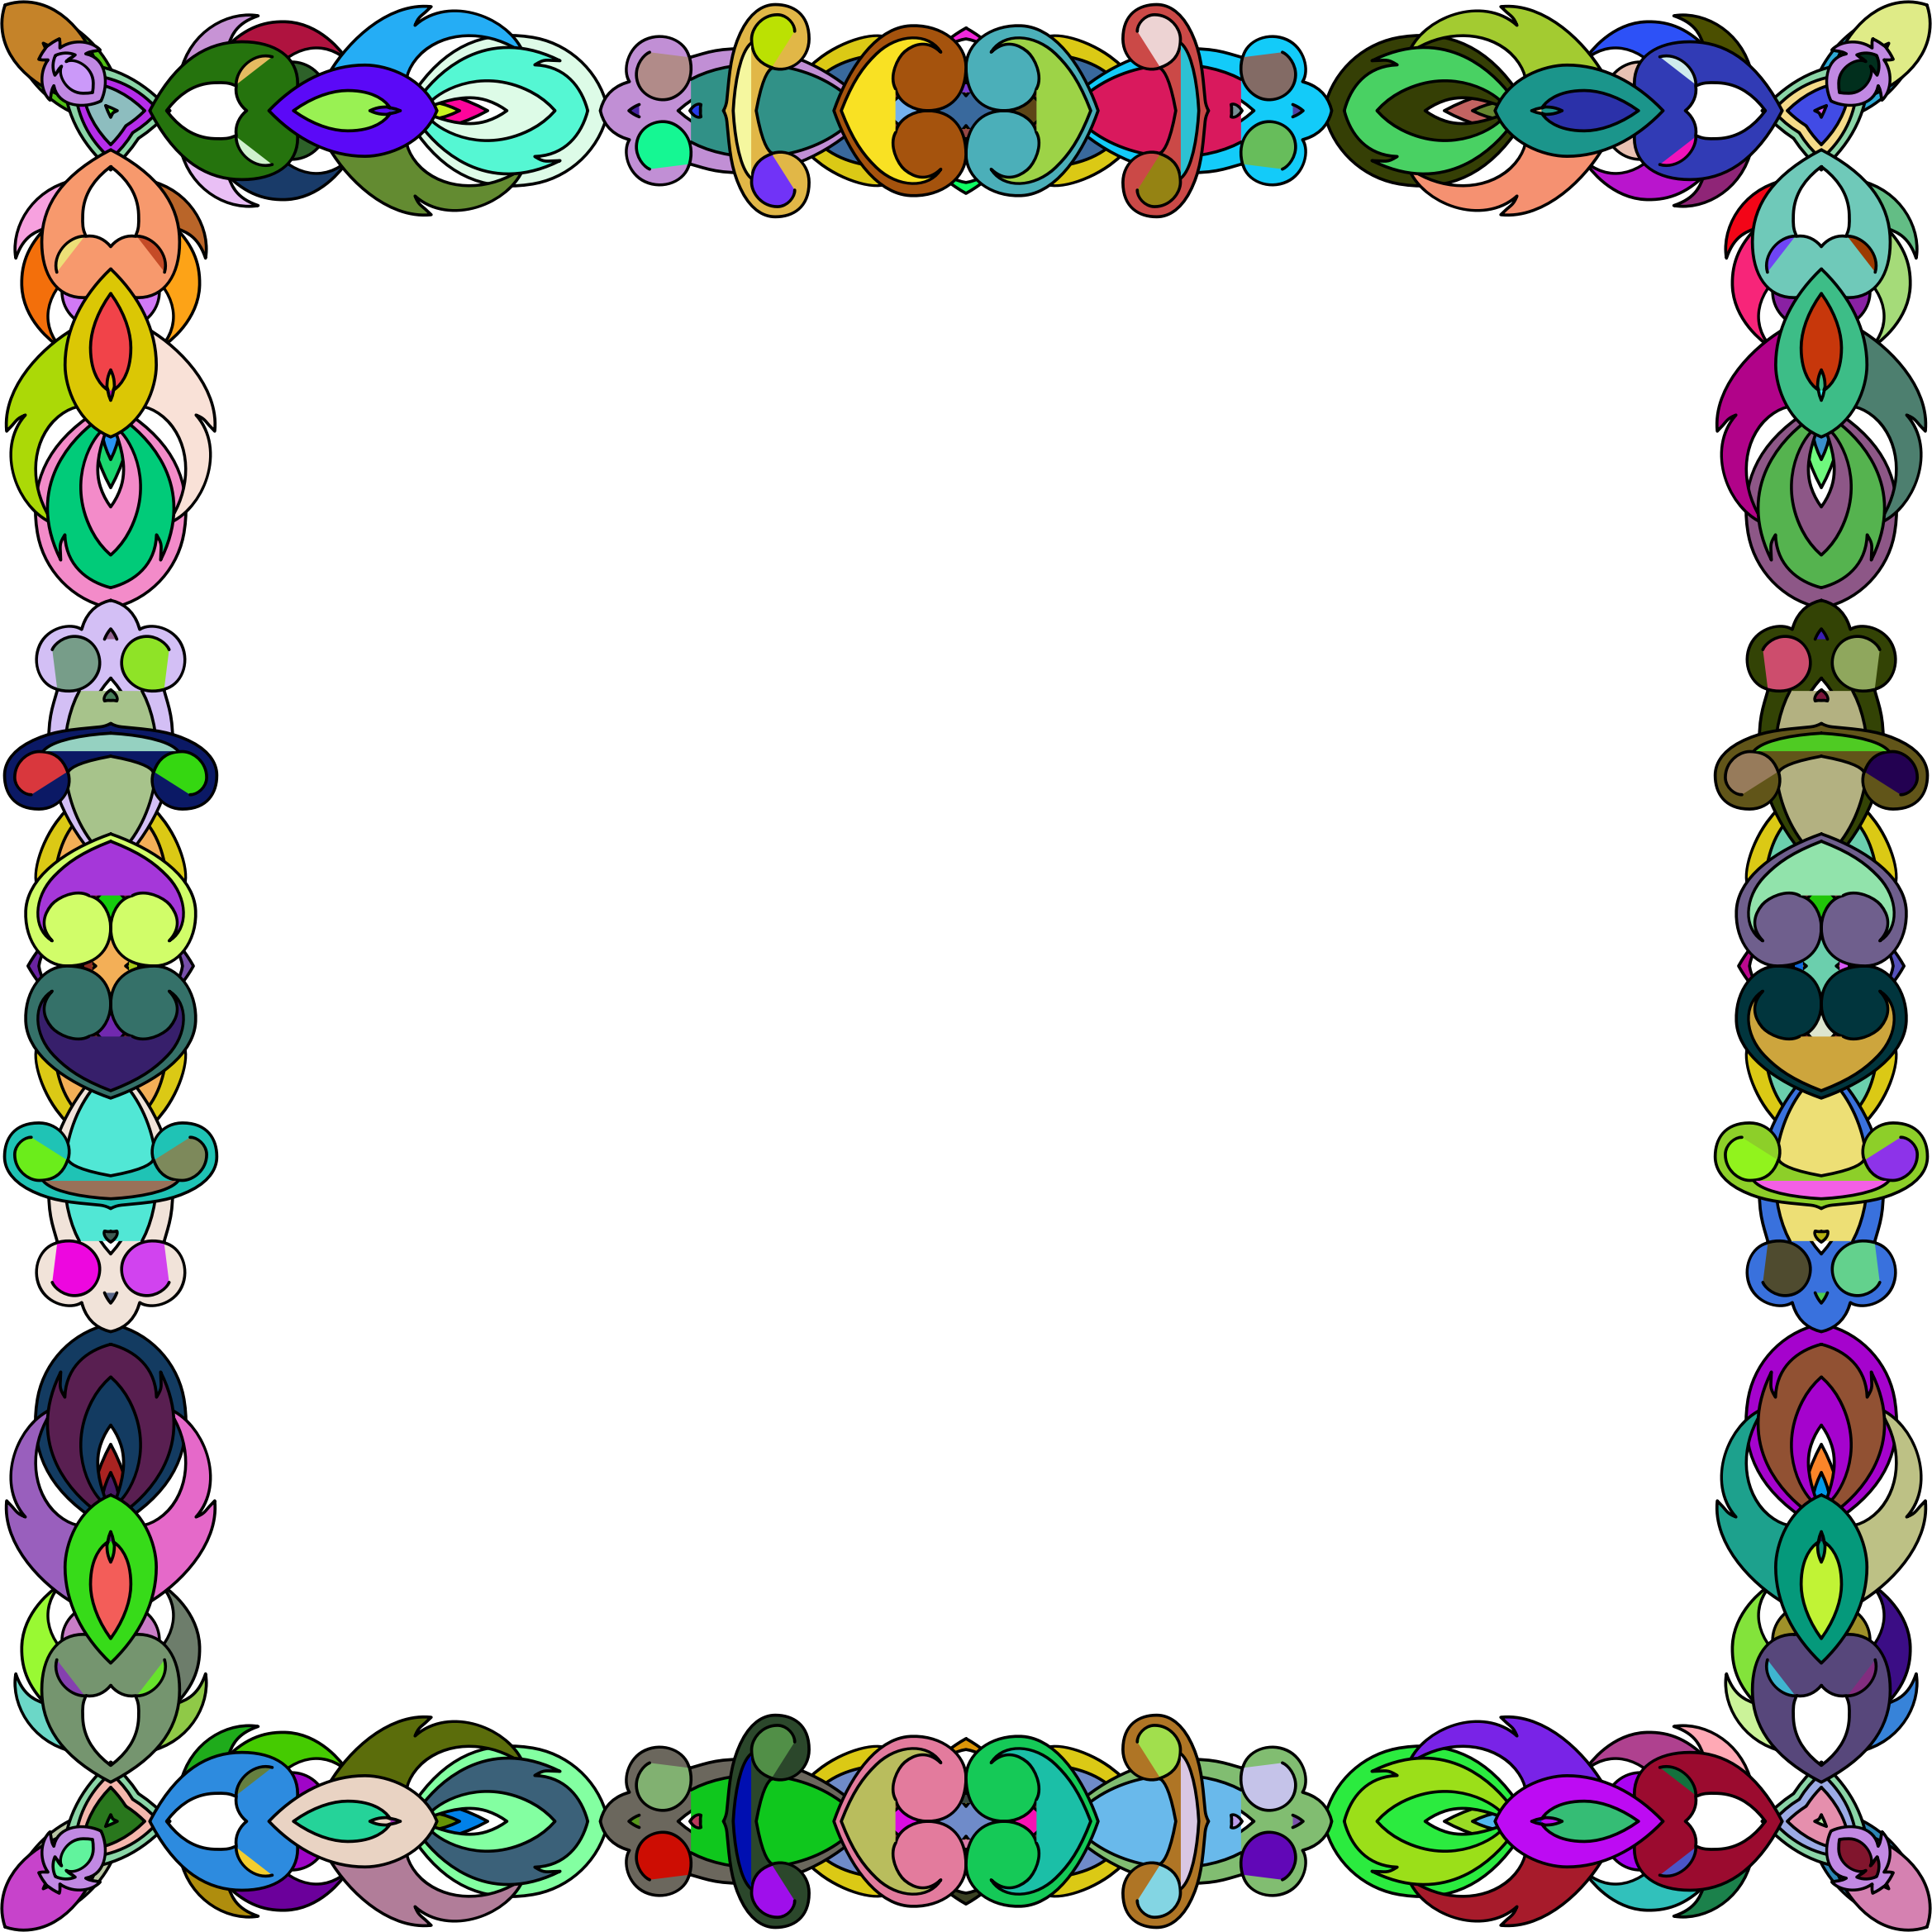 Colorful Abstract Frame 2 - Portable Network Graphics (2338x2338)